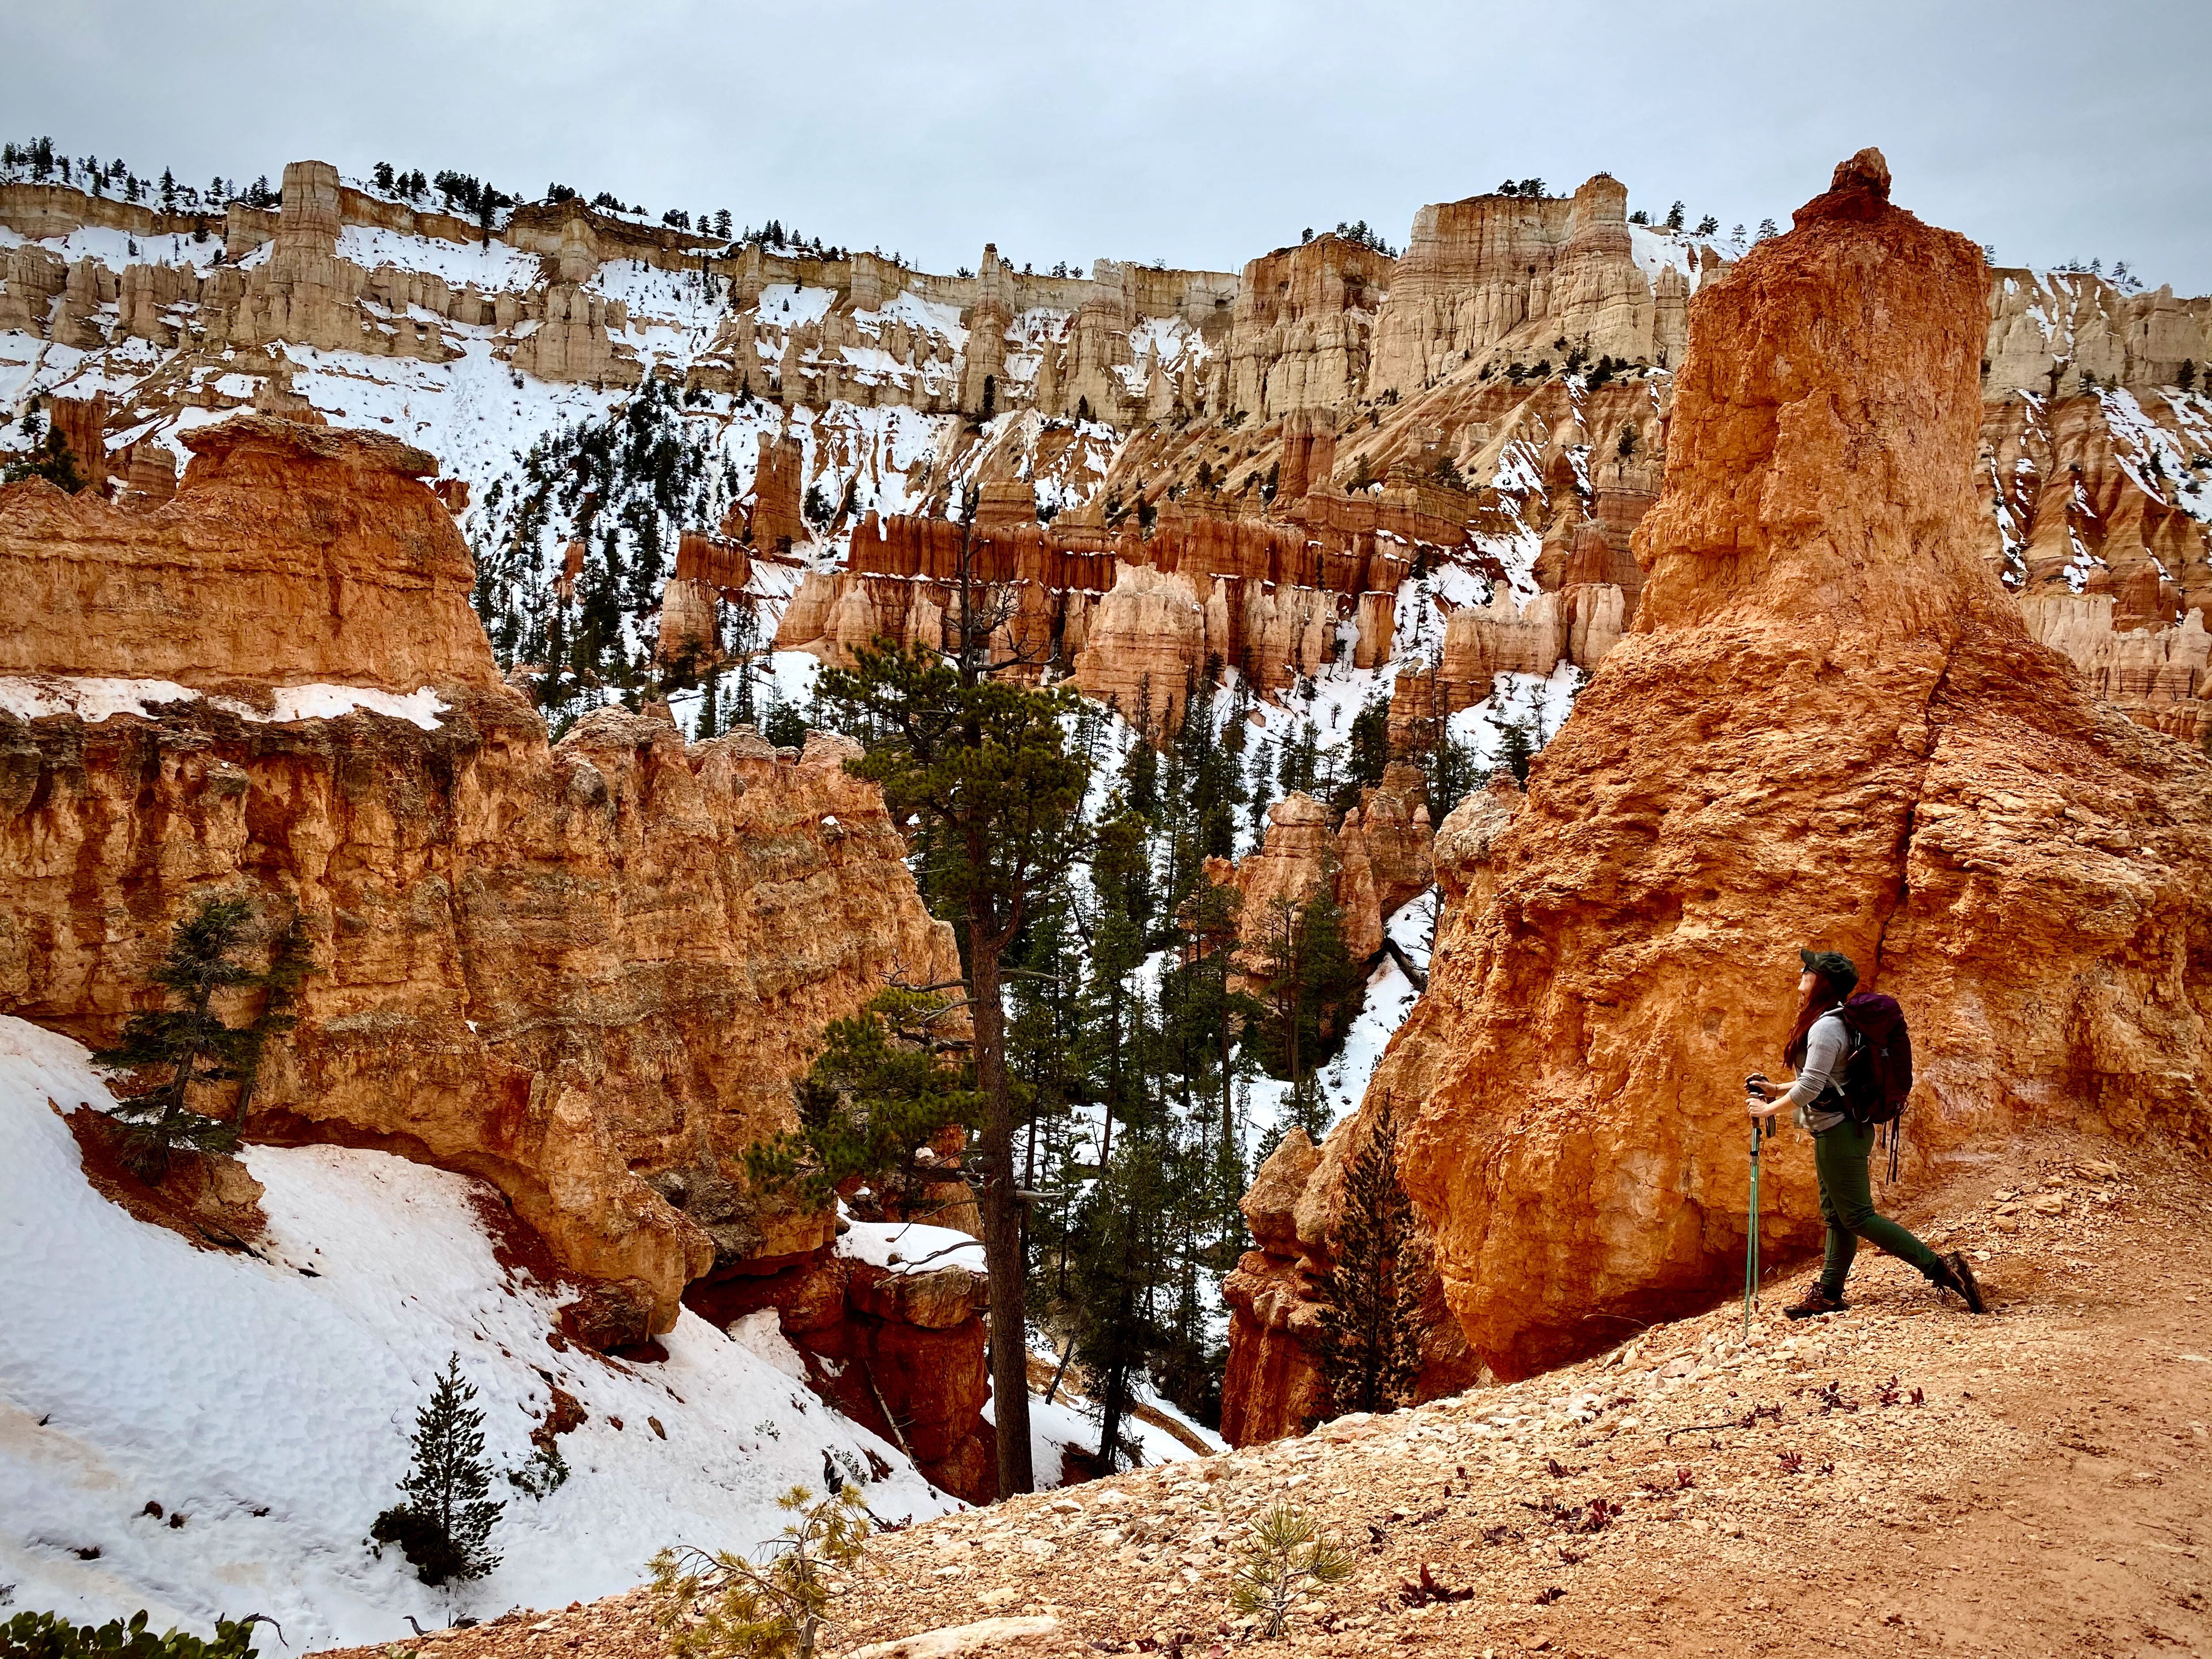 This author visited over 60 national parks in 2020. But which Utah